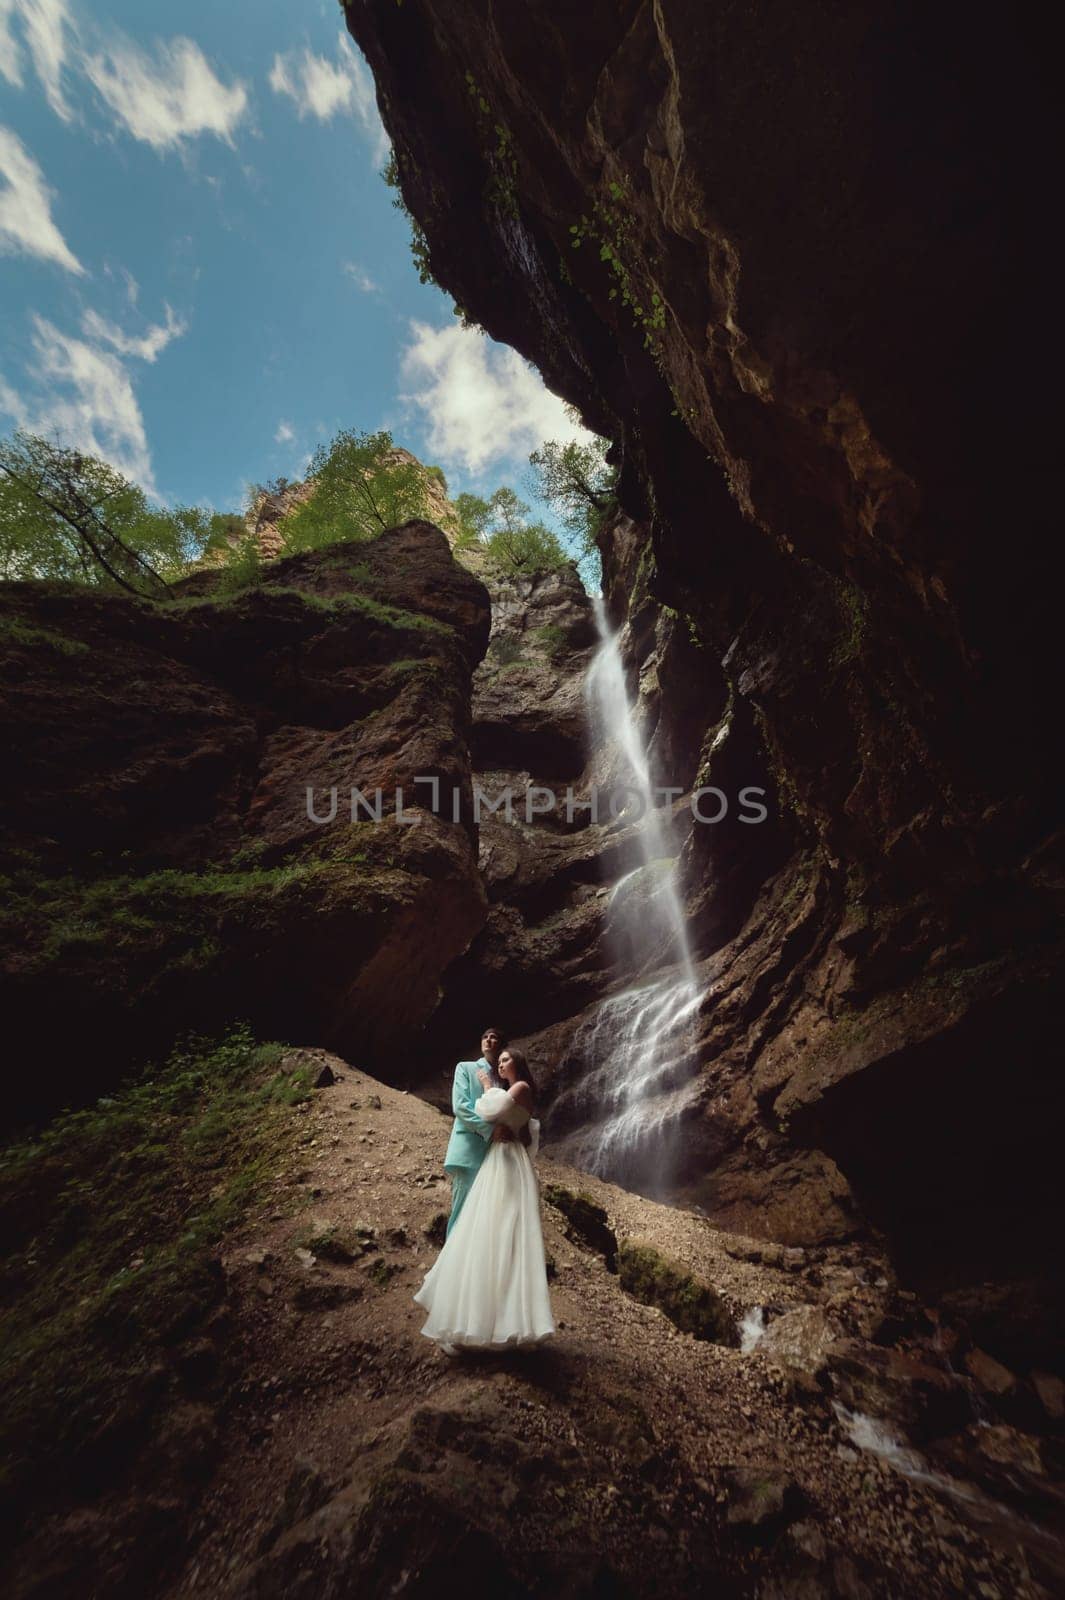 A young man and his wife are standing in an embrace in a canyon against the backdrop of a high waterfall. Newlyweds wedding couple in the mountains.